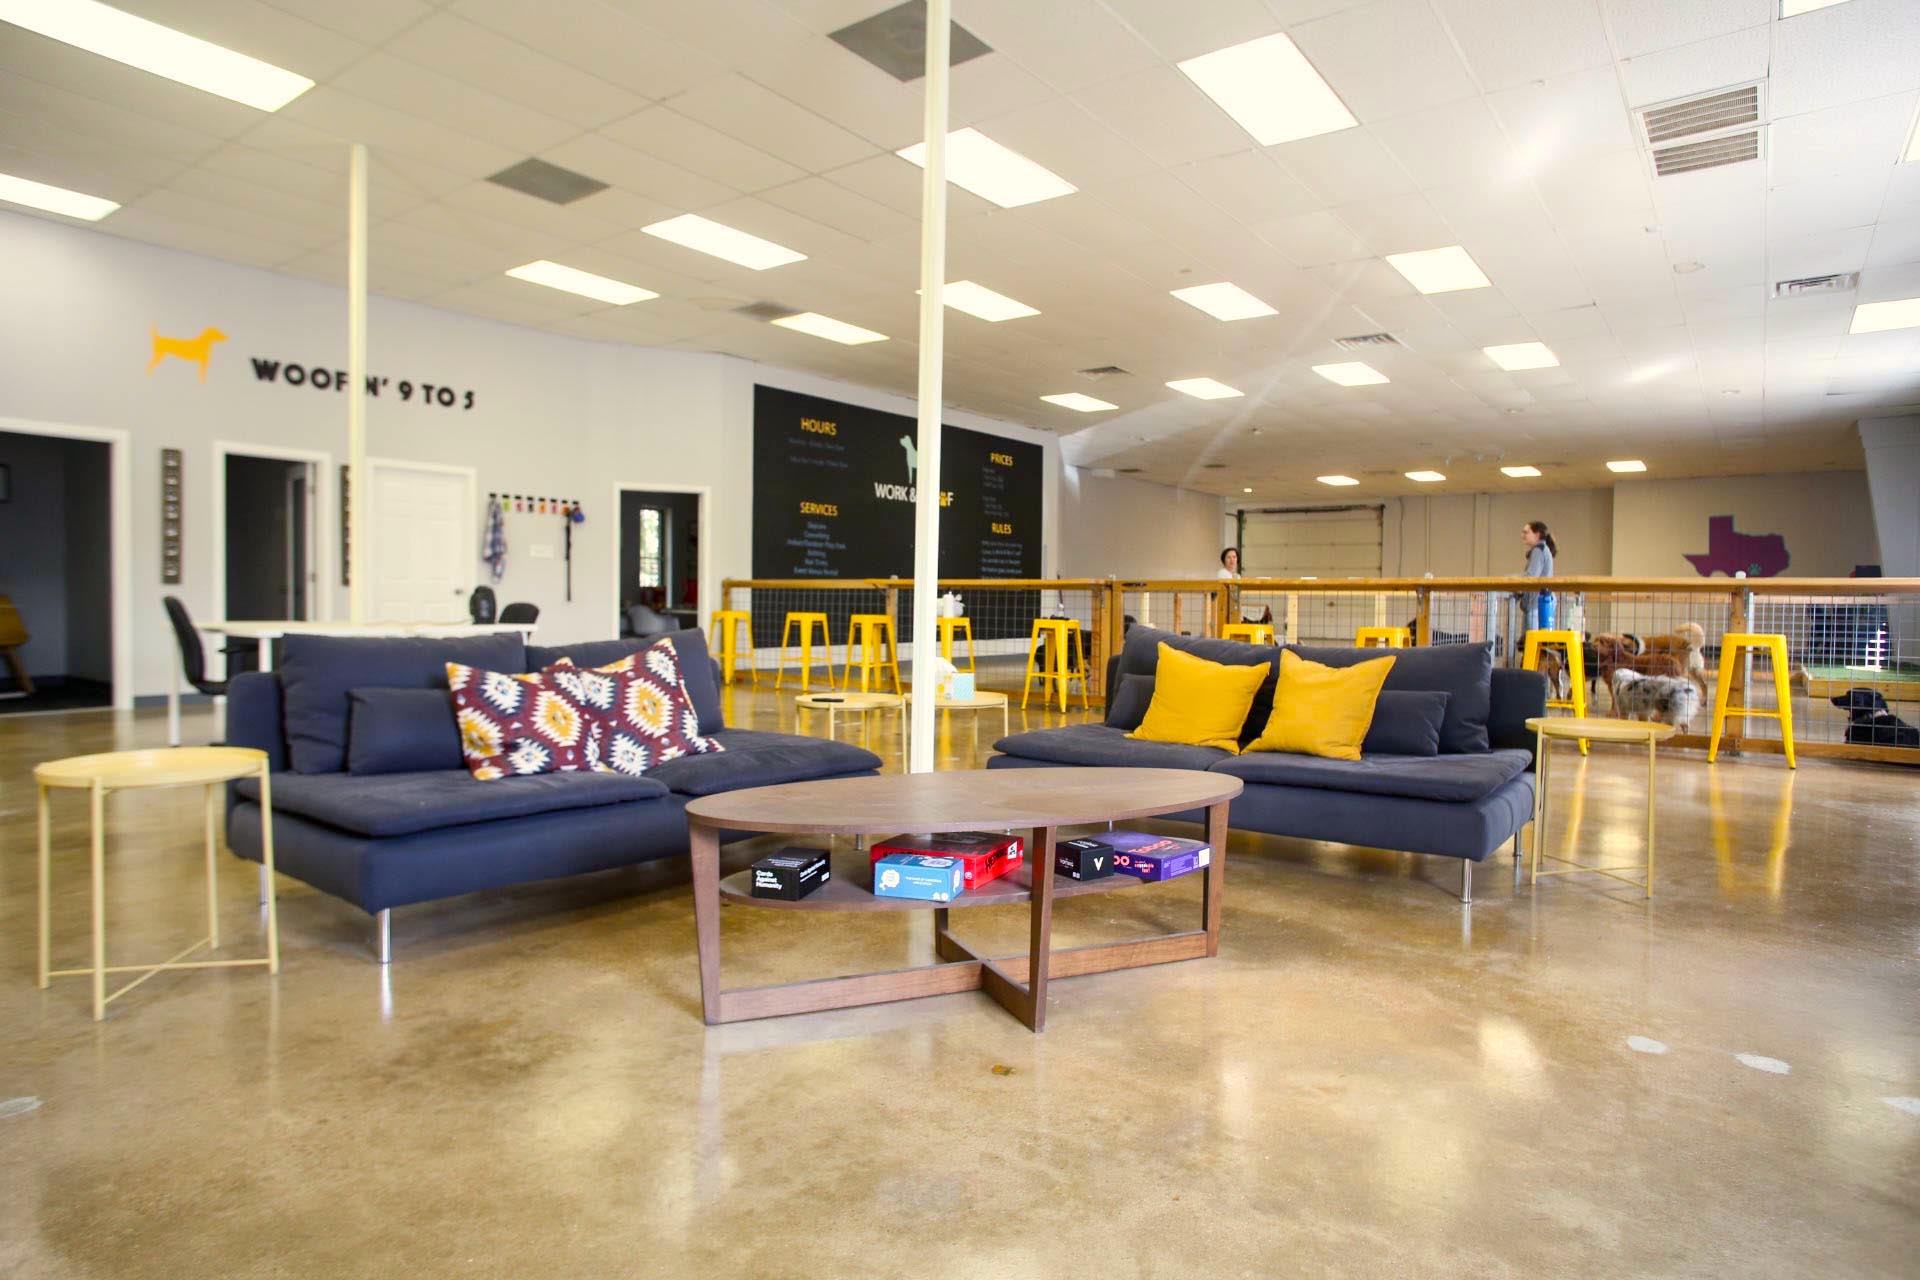 12 of the best coworking spaces in Austin, Texas